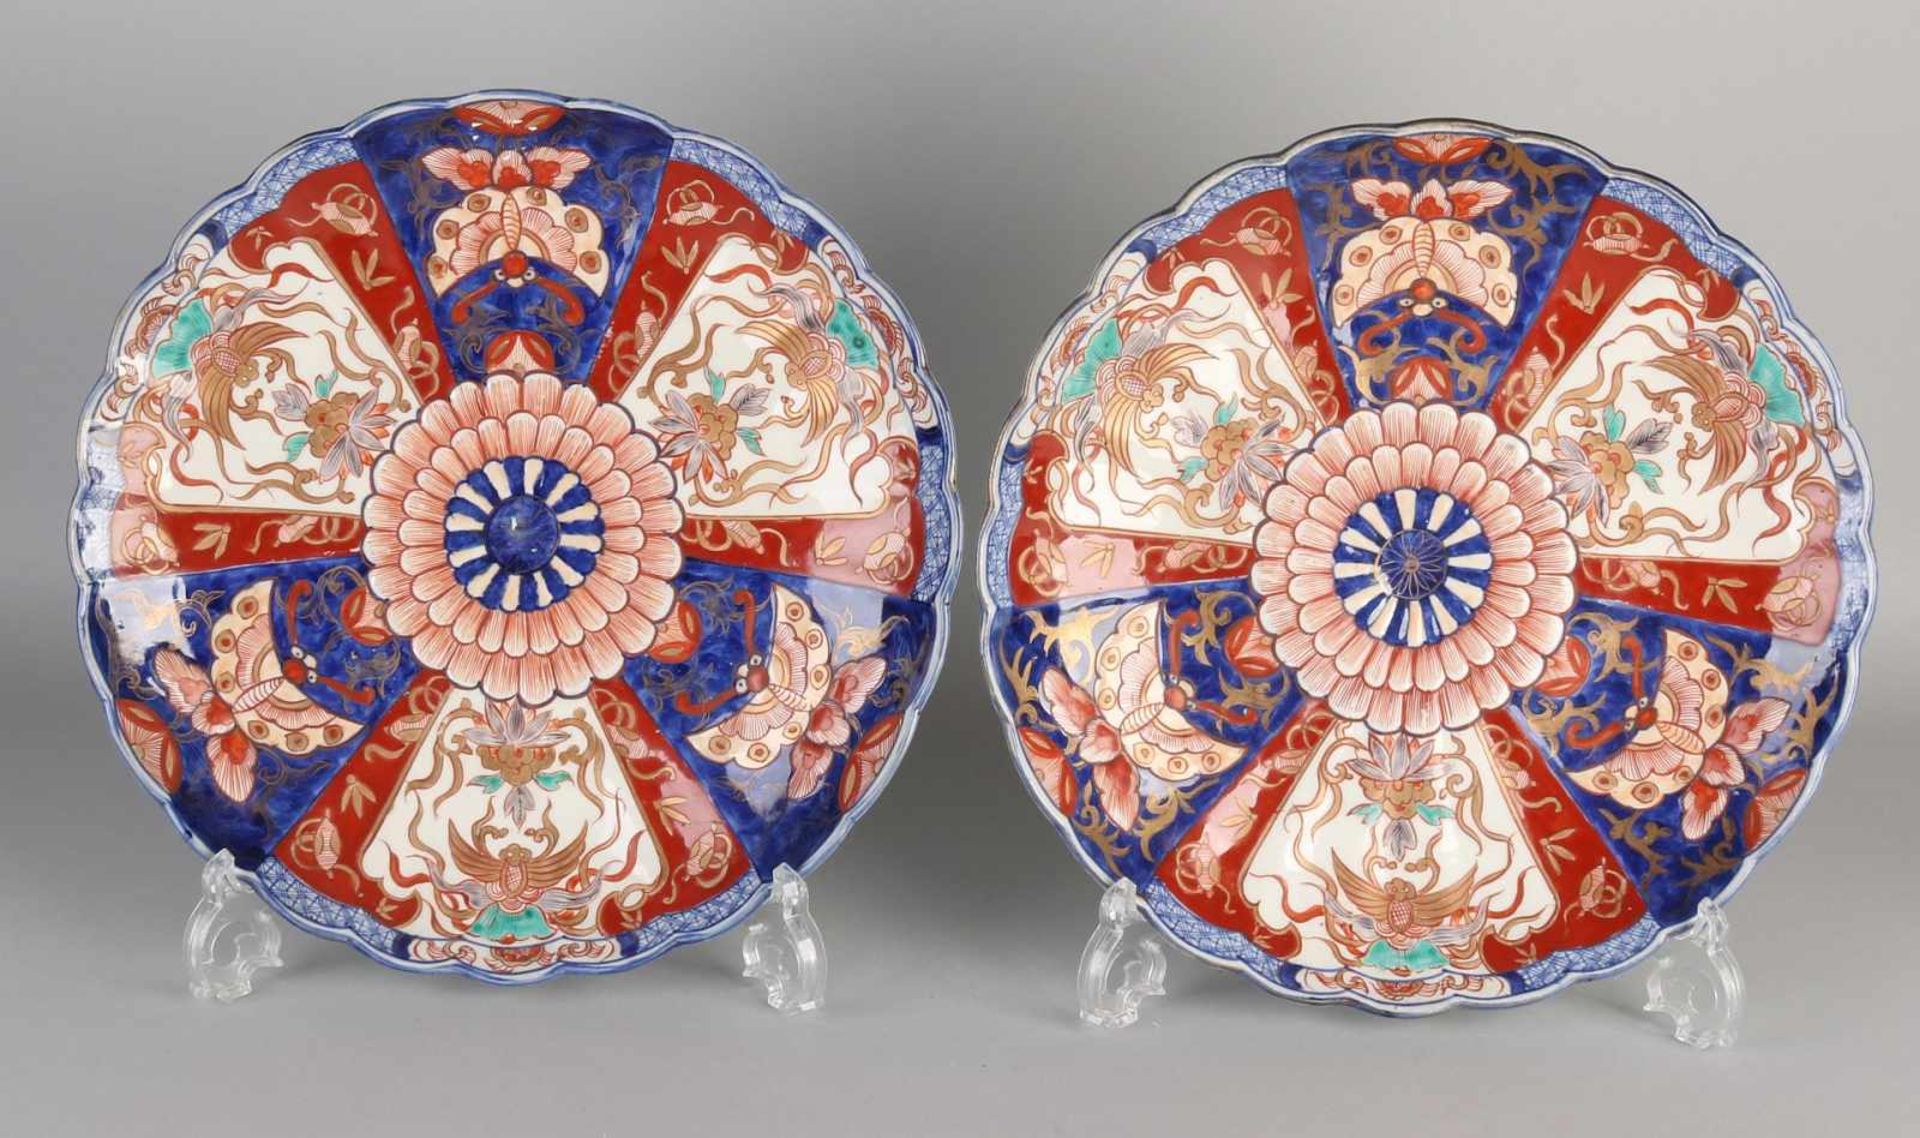 Two beautiful large 19th century Imari porcelain decorative dishes. Gecontourneerd. With butterfly /